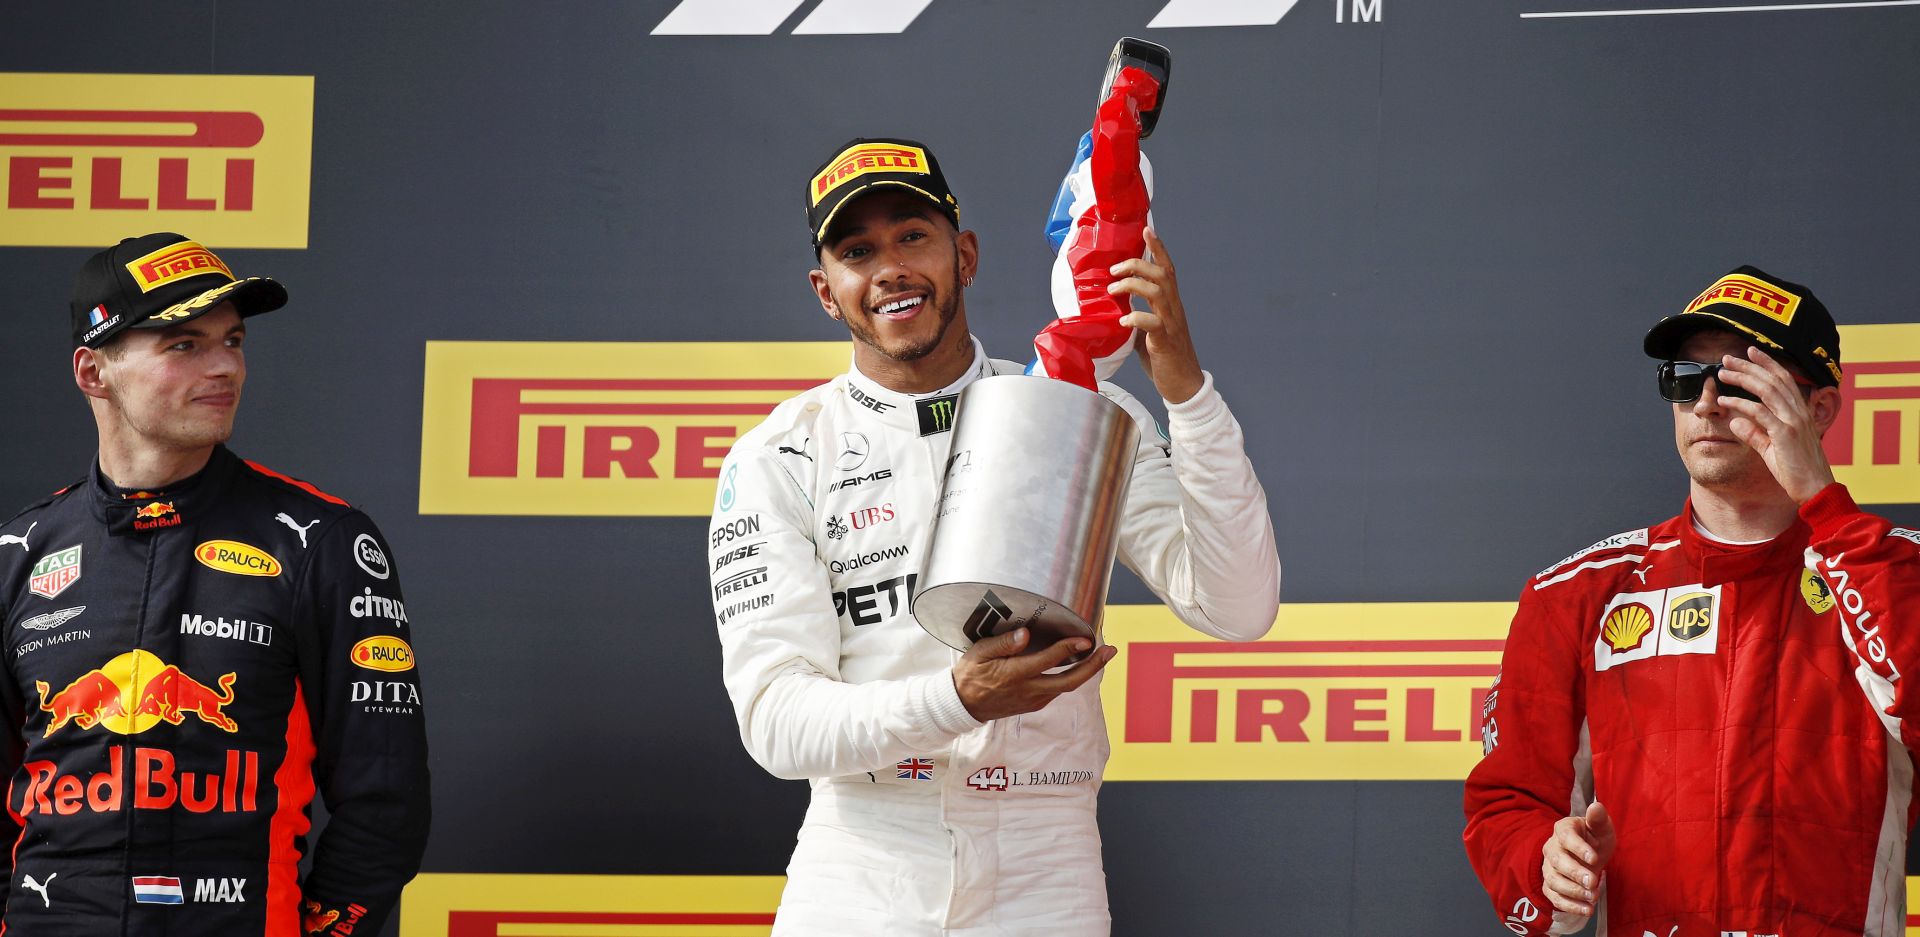 epa06836955 British Formula One driver Lewis Hamilton (C) of Mercedes AMG GP celebrates with his trophy on the podium after winning the 2018 French Formula One Grand Prix at Paul Ricard circuit in Le Castellet, France, 24 June 2018. Hamilton won ahead of second placed Dutch driver Max Verstappen (L) of Aston Martin Red Bull Racing and third placed Finnish driver Kimi Raikkonen (R) of Scuderia Ferrari.  EPA/YOAN VALAT